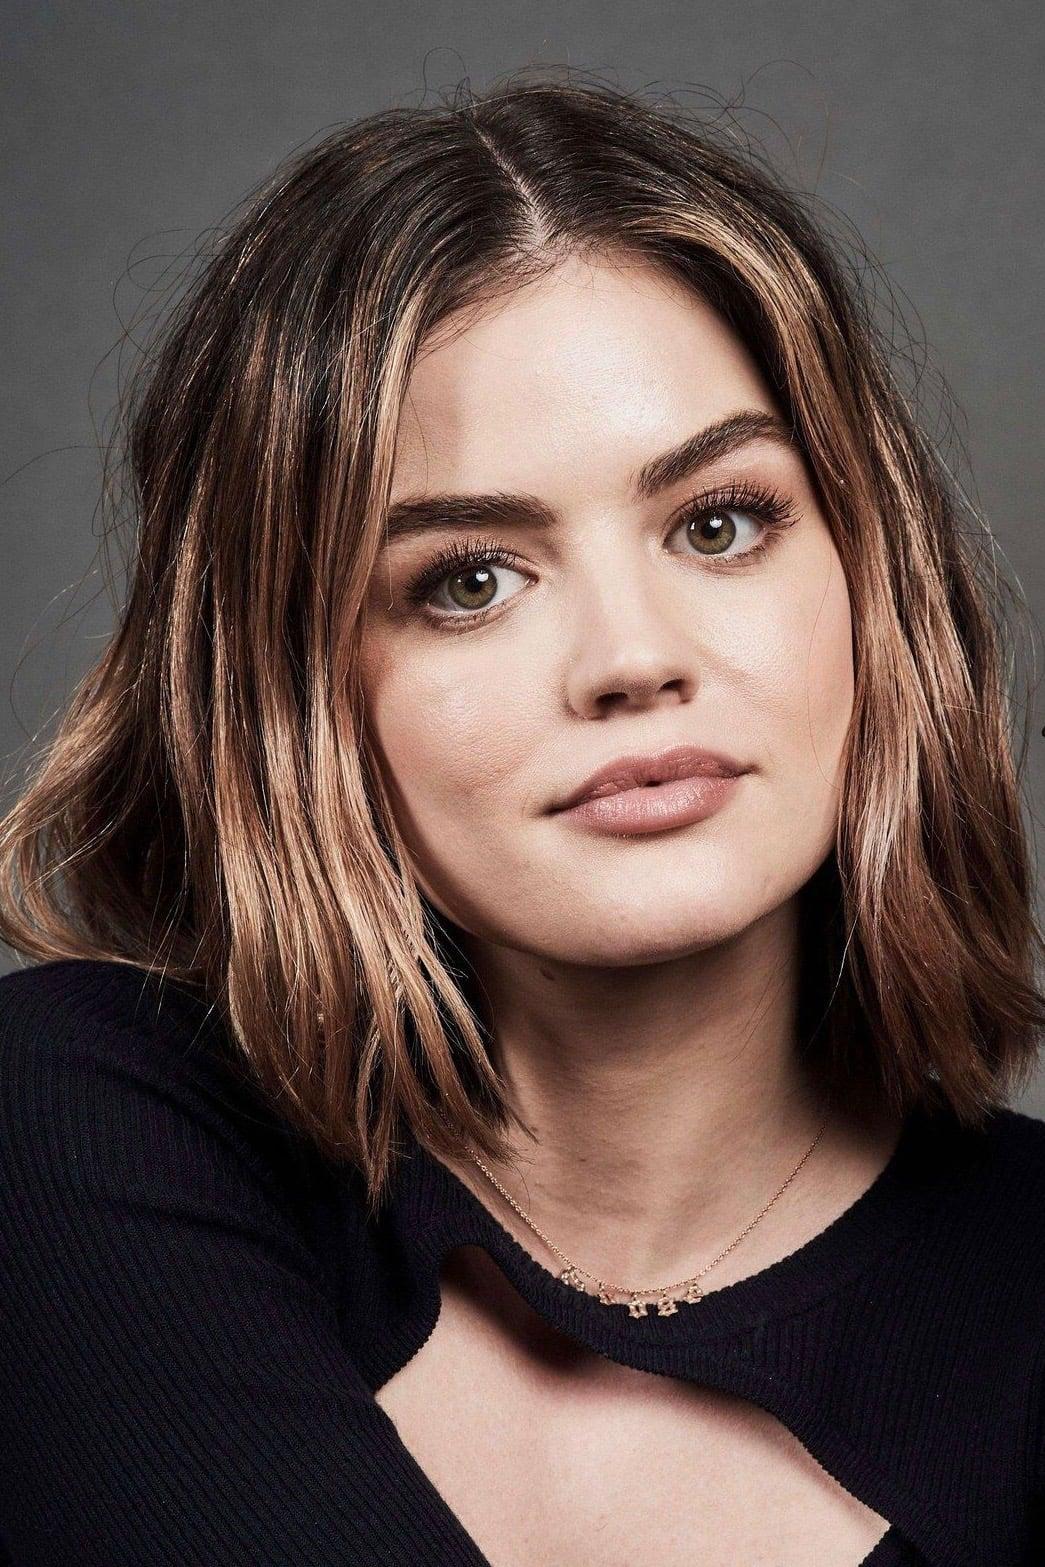 Lucy Hale poster